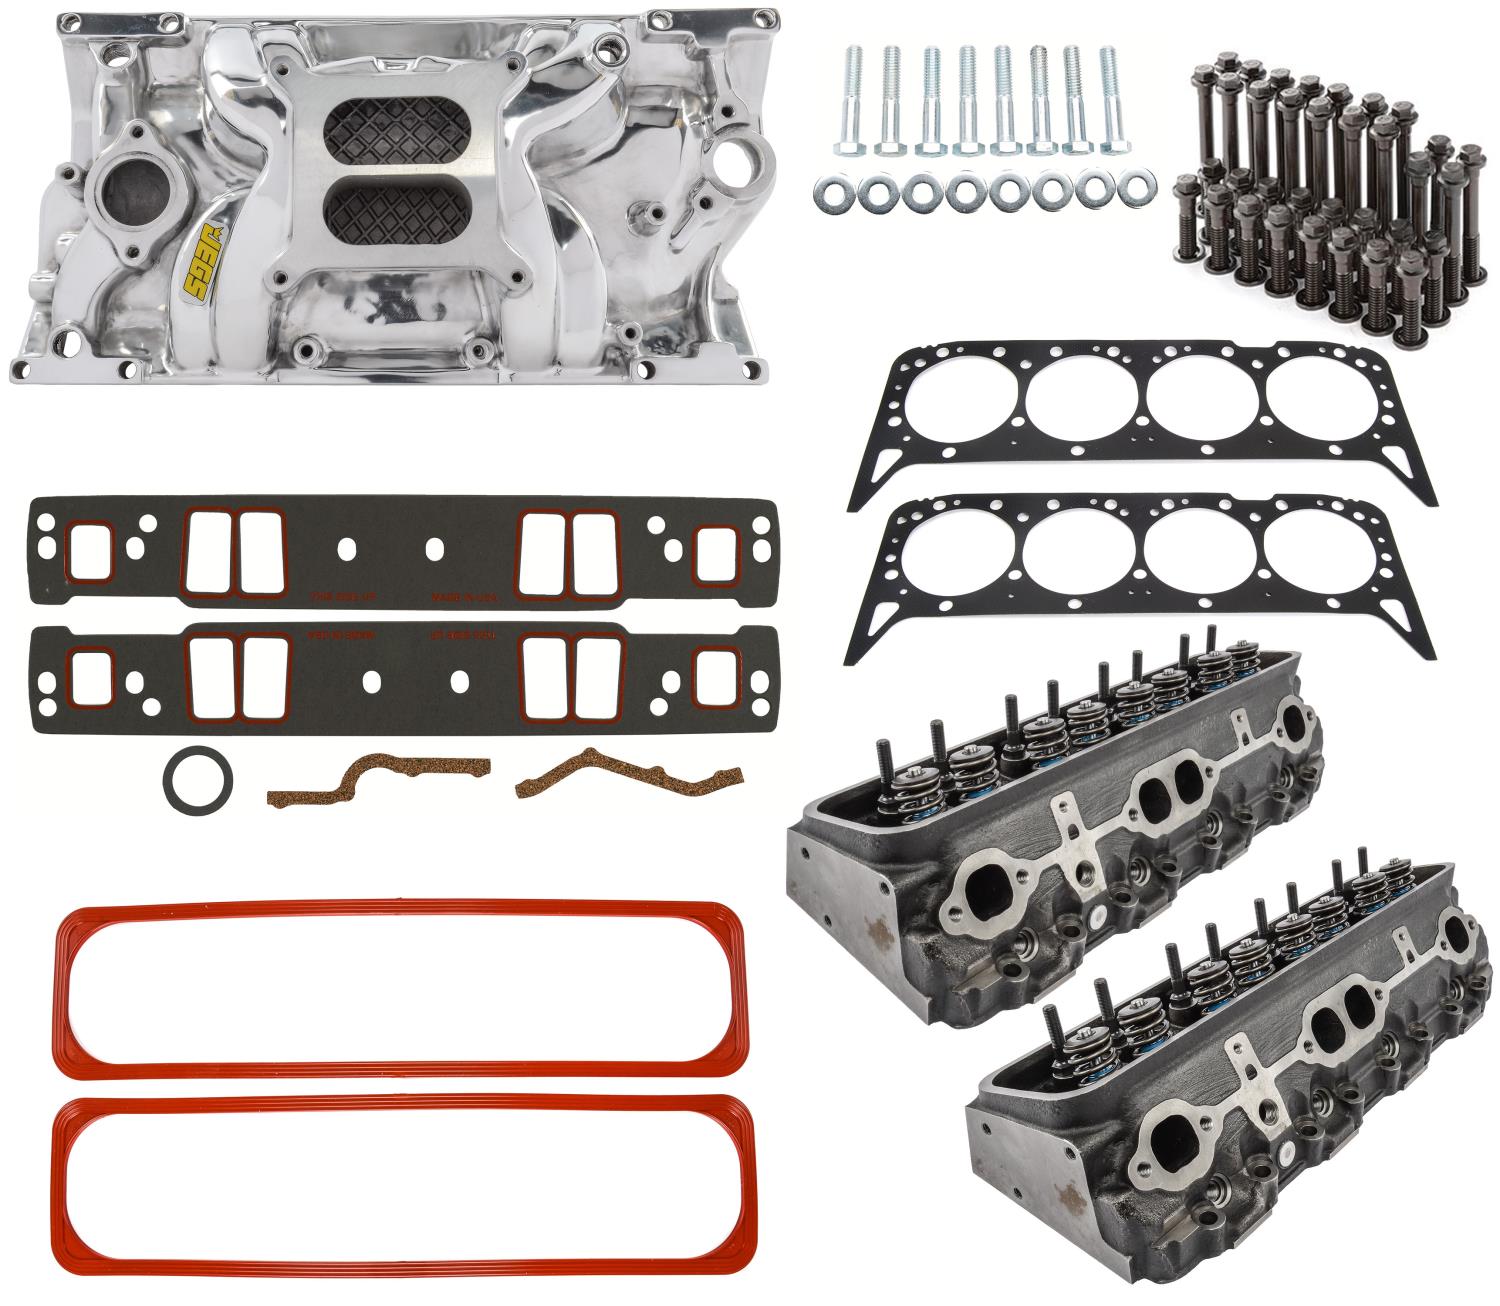 Vortec Cylinder Head & High Rise Intake Manifold Kit for 1996-2002 Chevy Small Block 5.7L Engine [Polished Dual Plane]